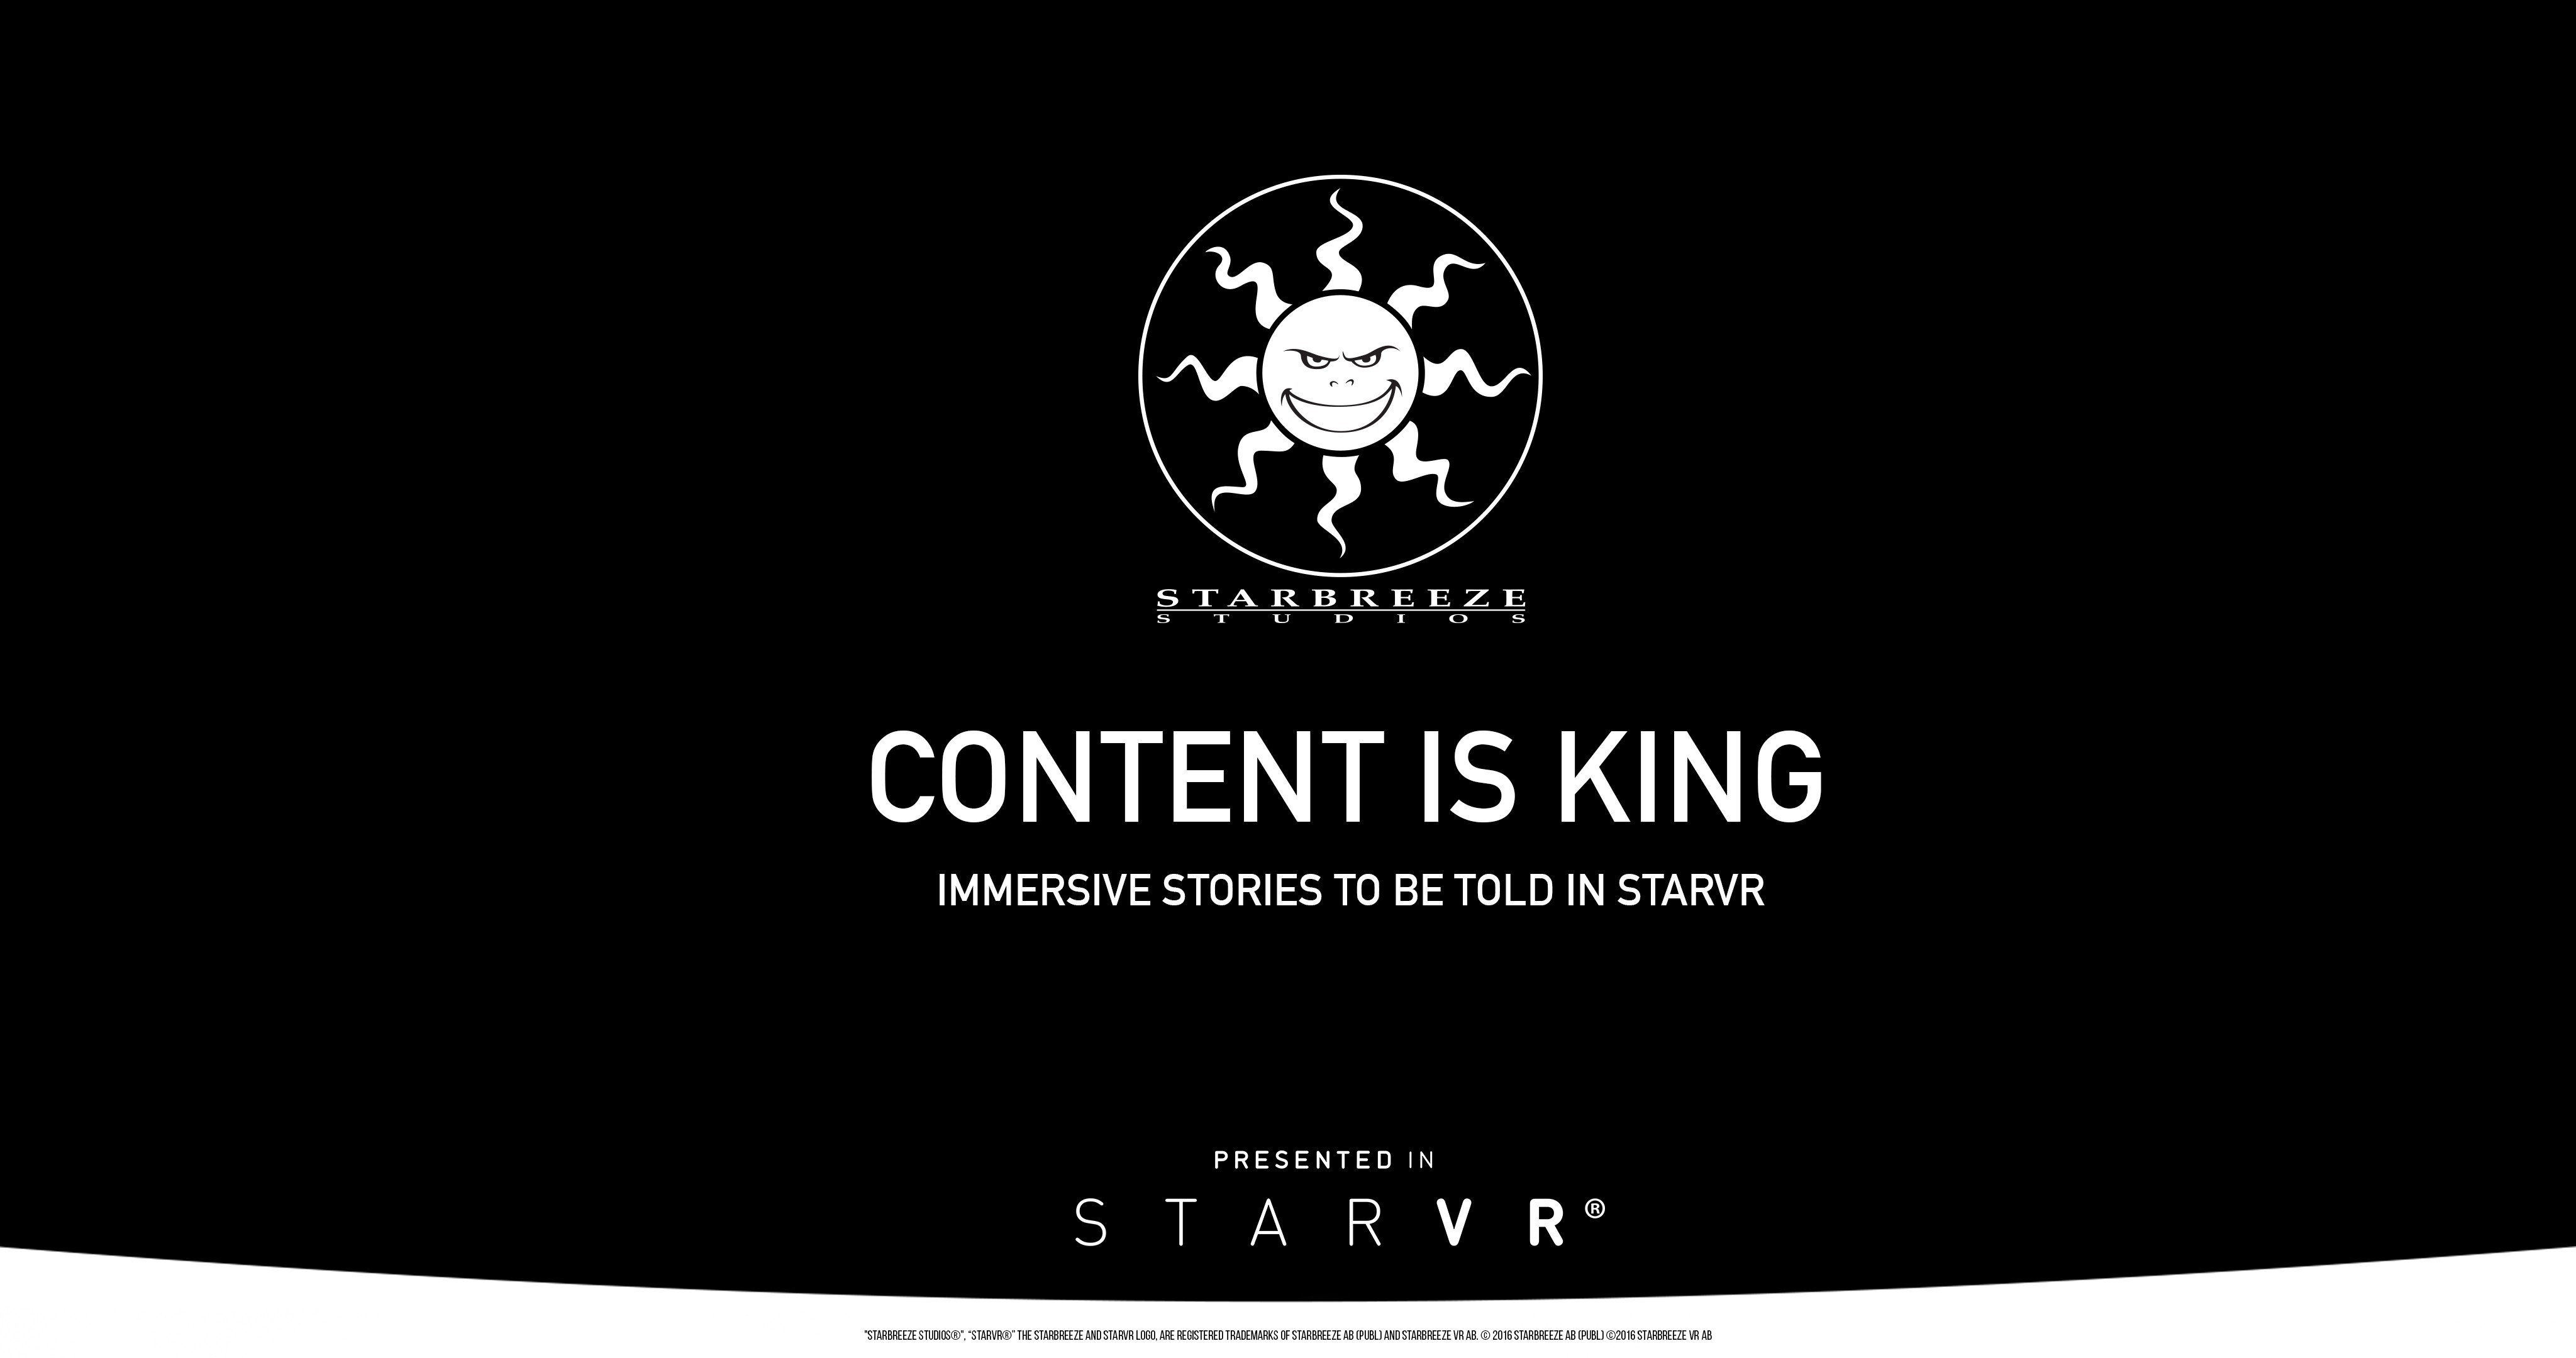 Immersive stories to be told in StarVR